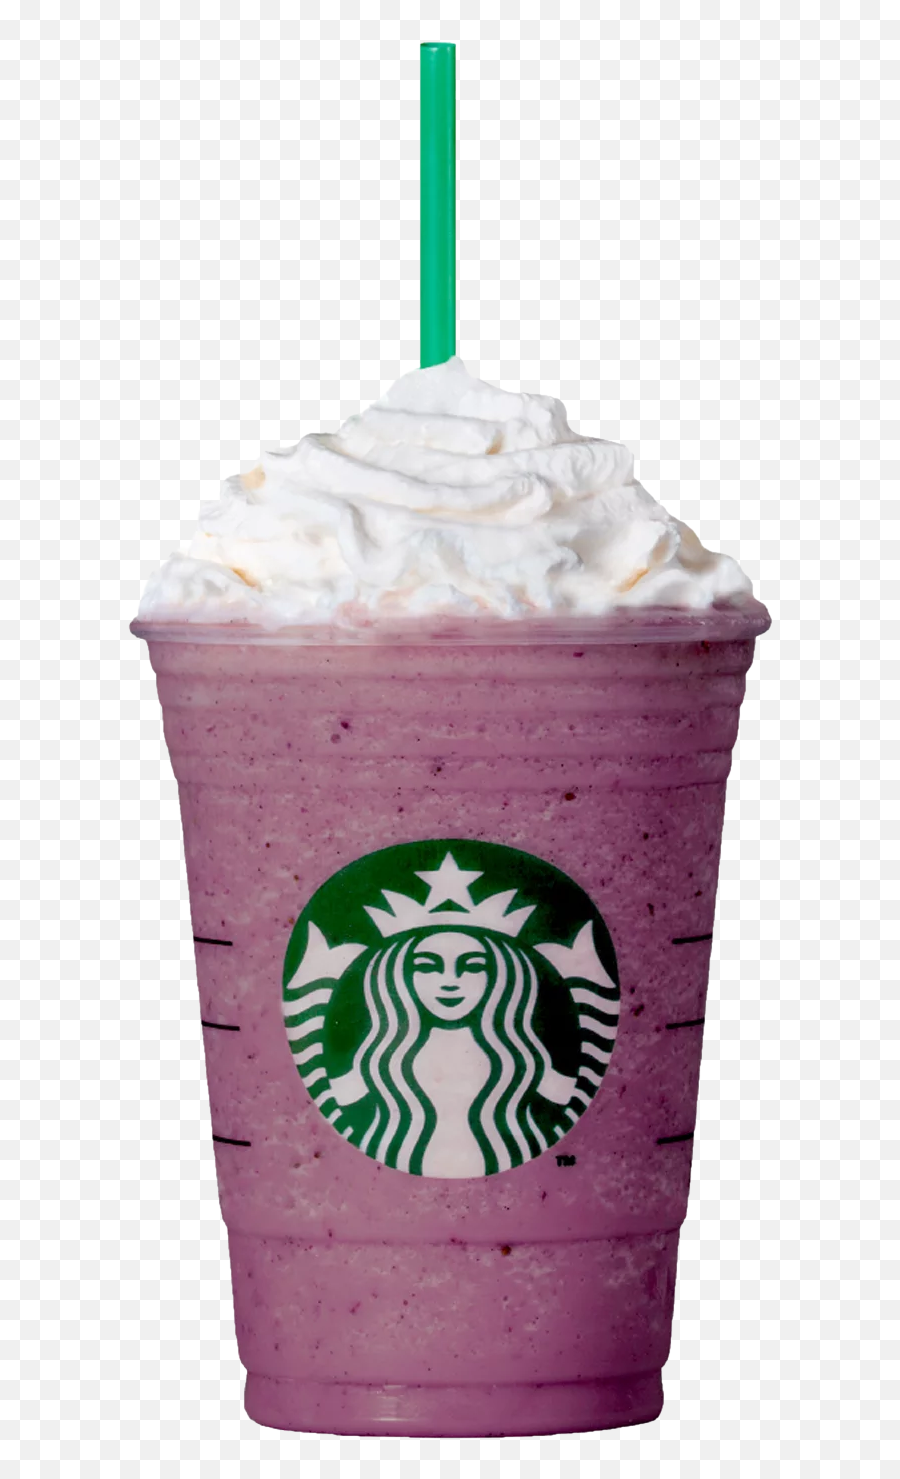 Frappuccino Png 3 Image - Pokemon Go Drink Starbucks,Frappuccino Png